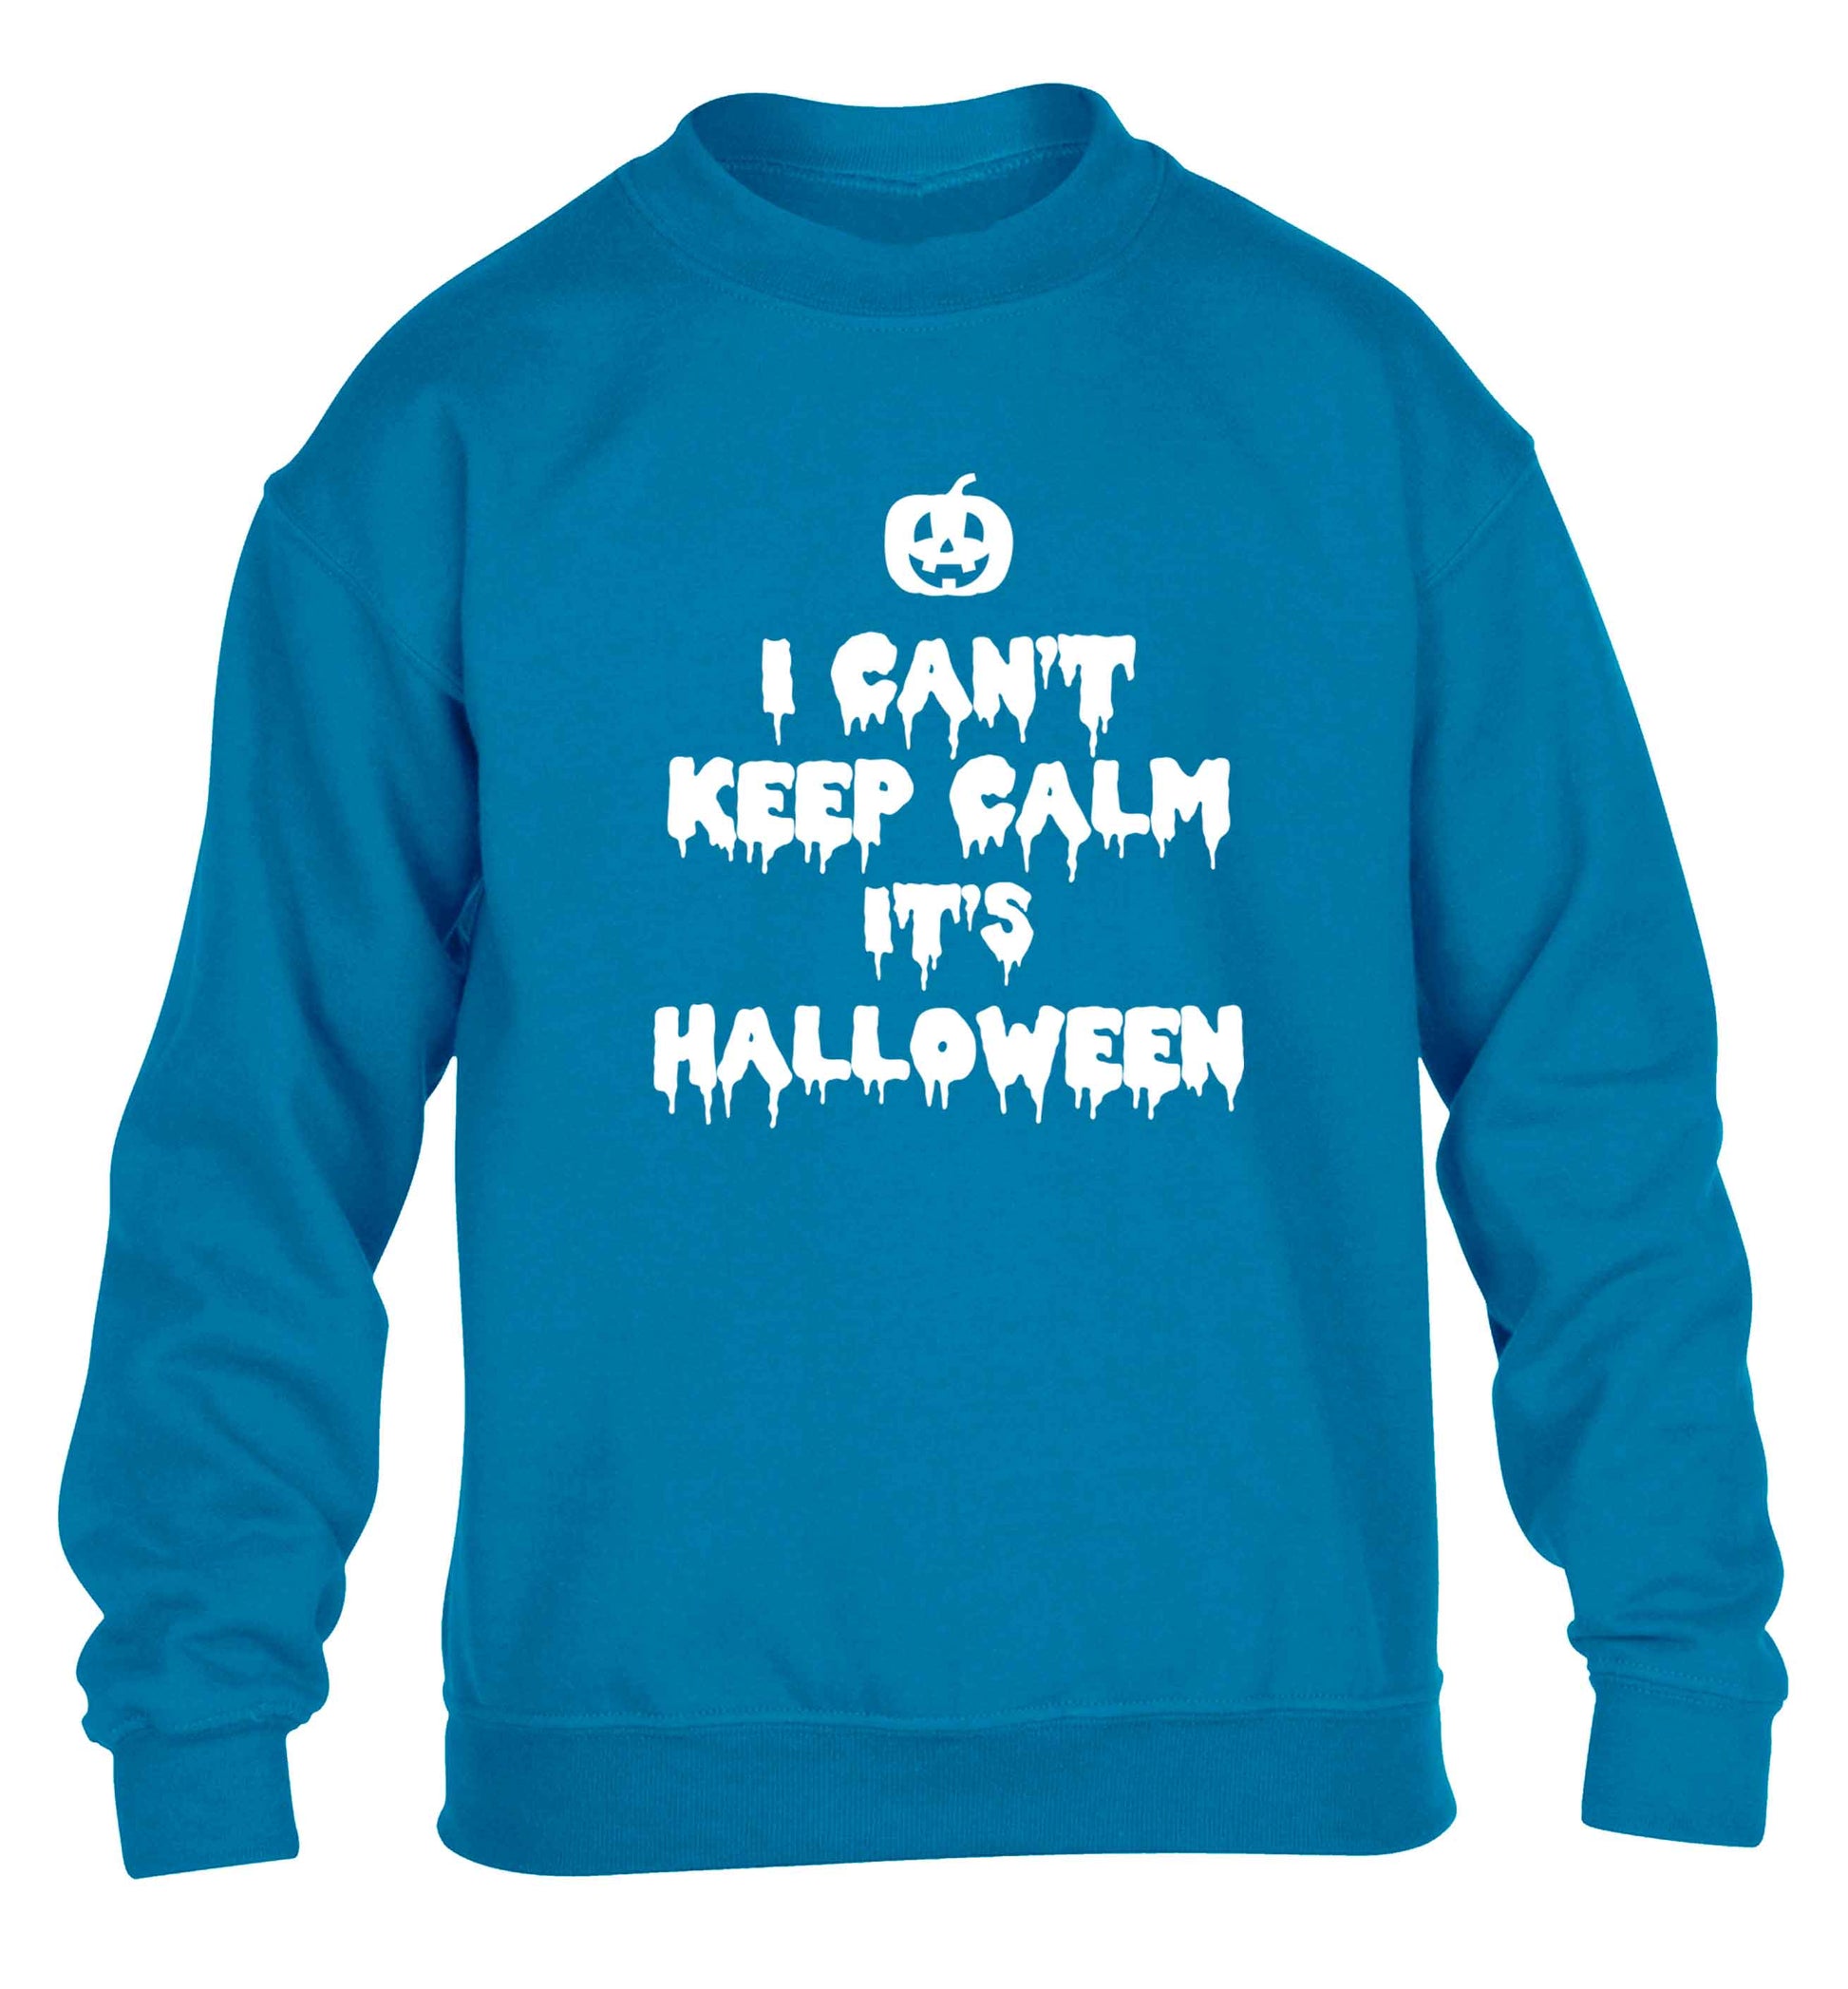 I can't keep calm it's halloween children's blue sweater 12-13 Years